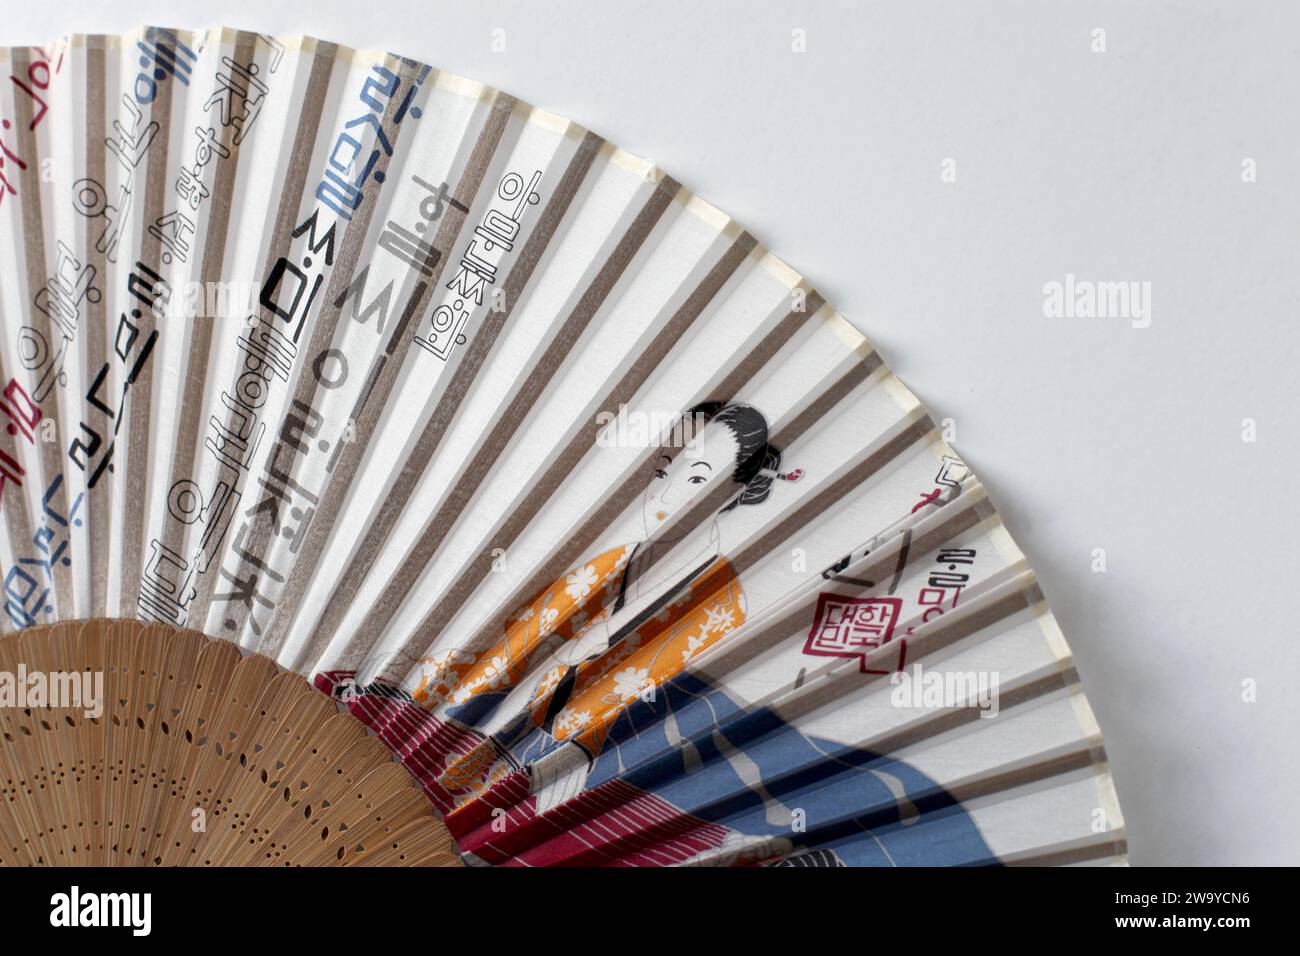 A buchae or traditional Korean fan which is often highly decorated. Stock Photo